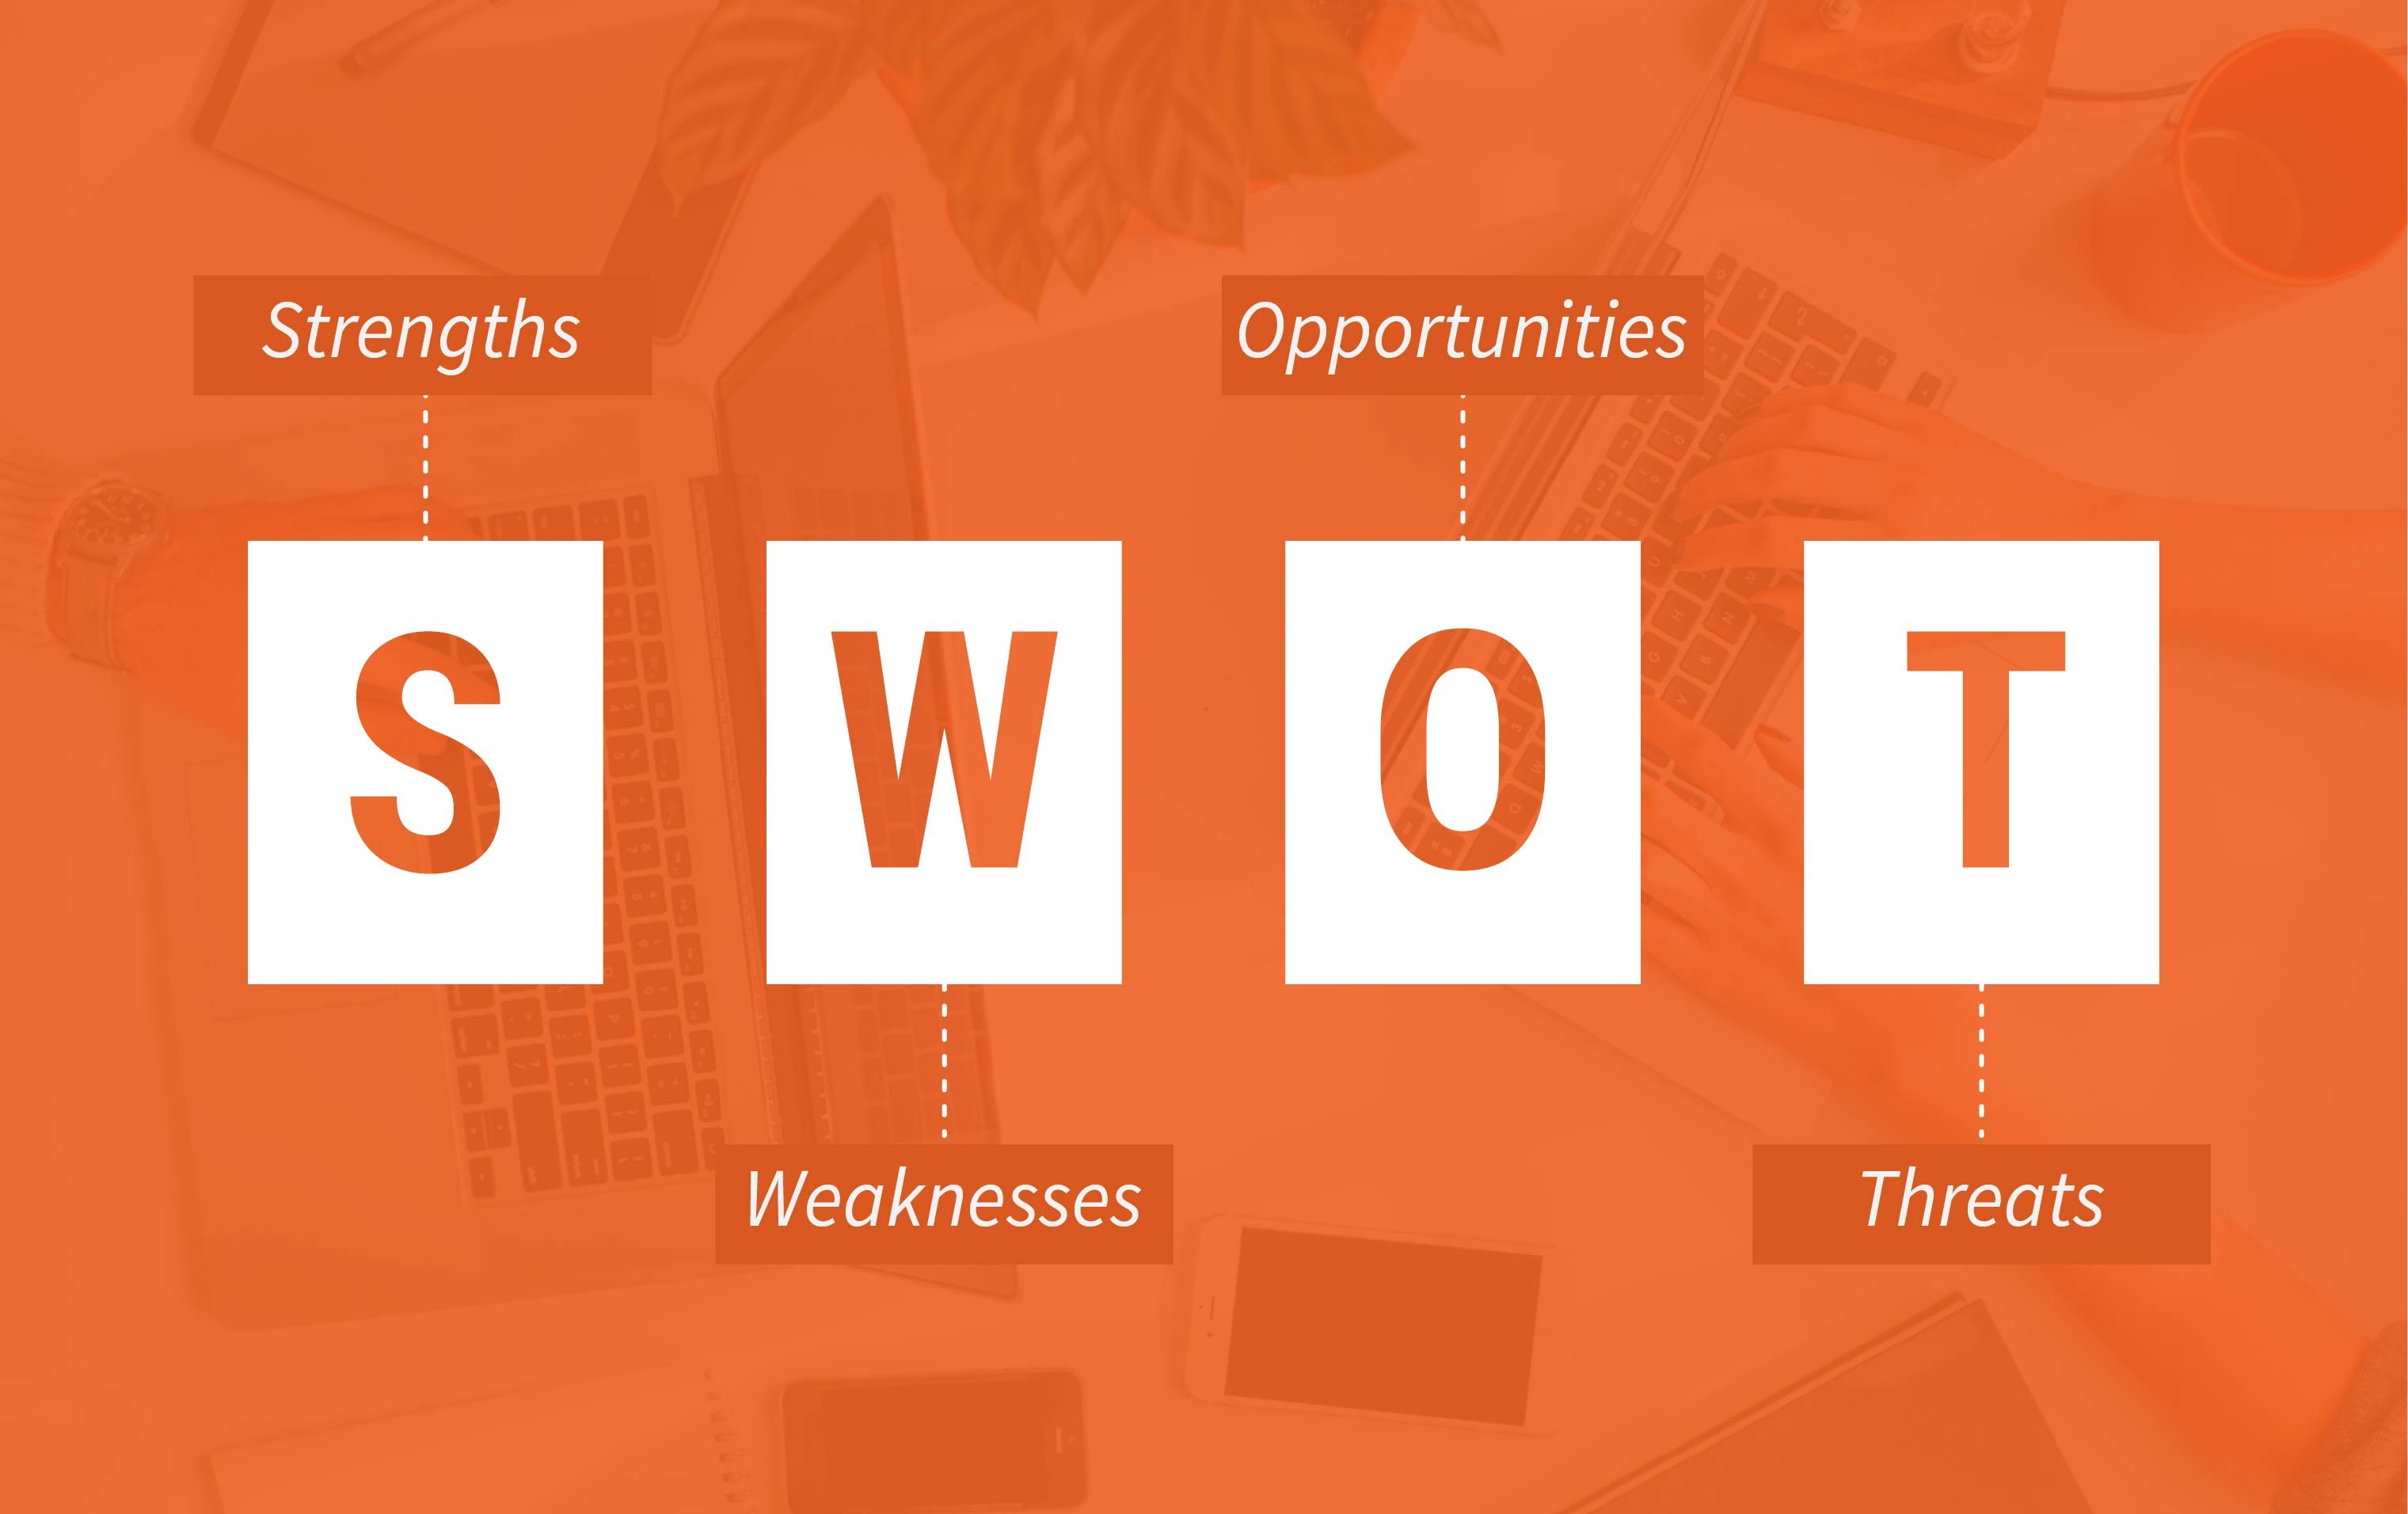 SWOT stands for Strengths, Weaknesses, Opportunities, and Threats